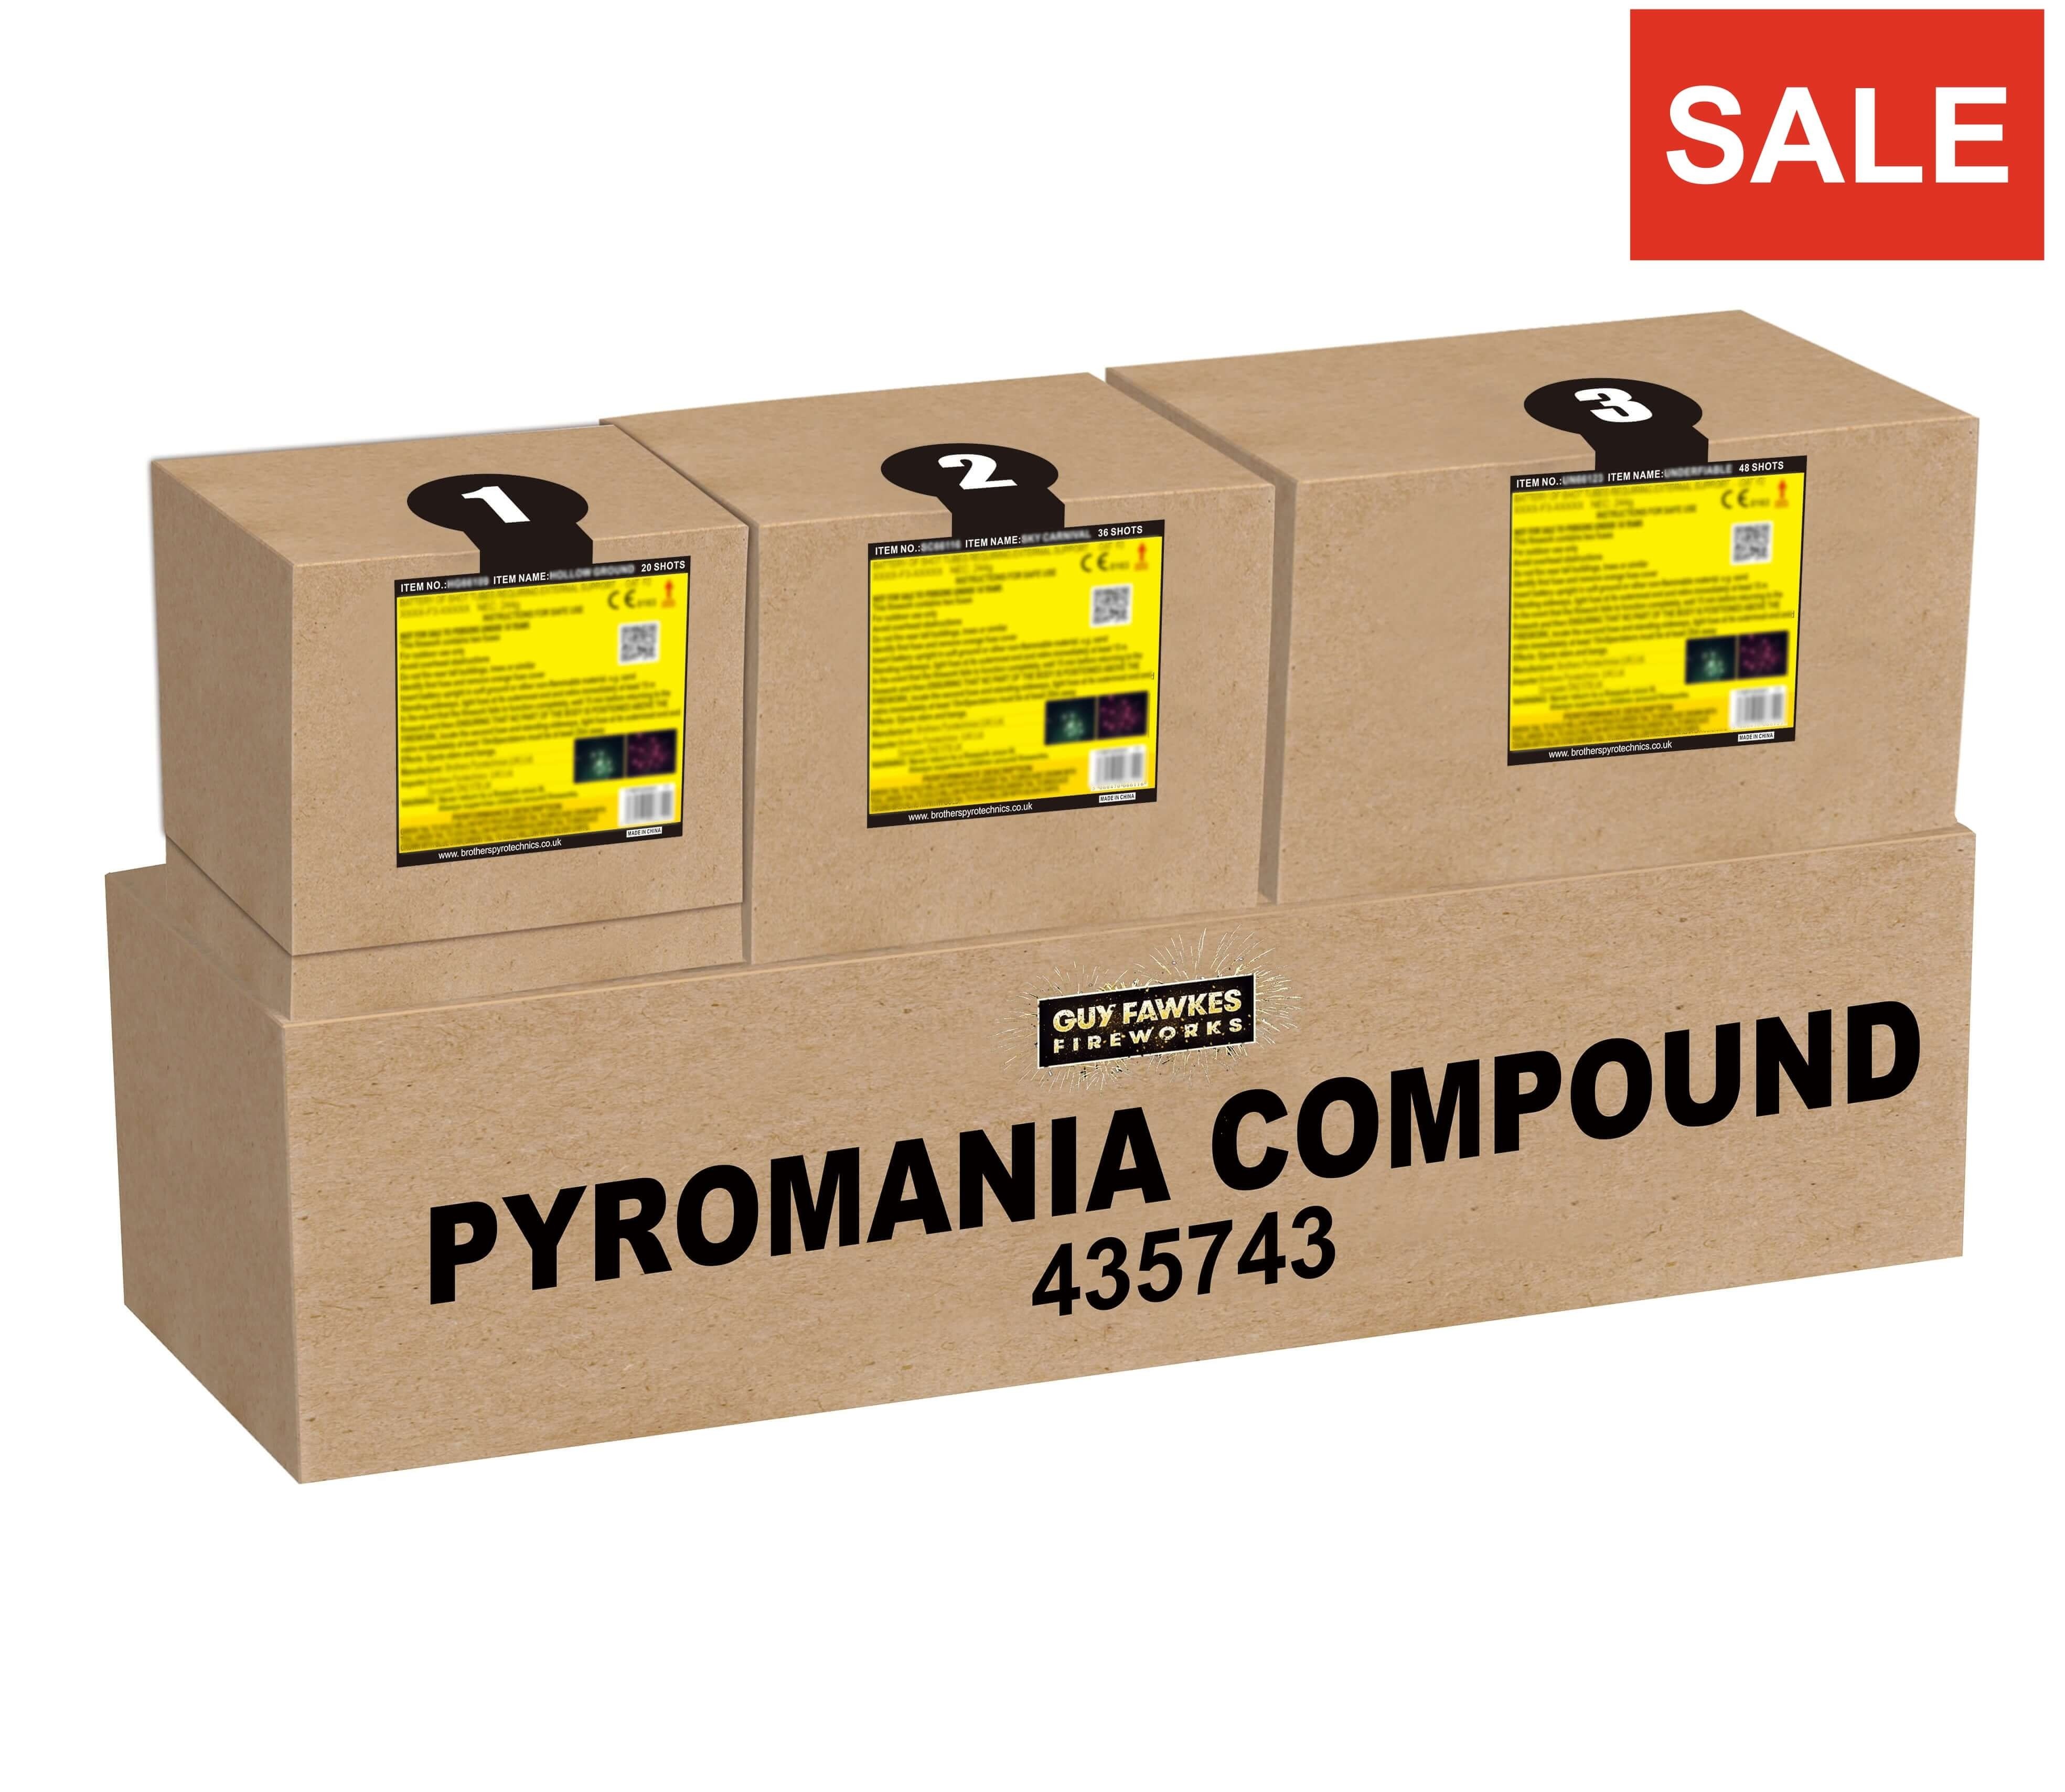 Pyromania Compound available at Fireworks Kingdom